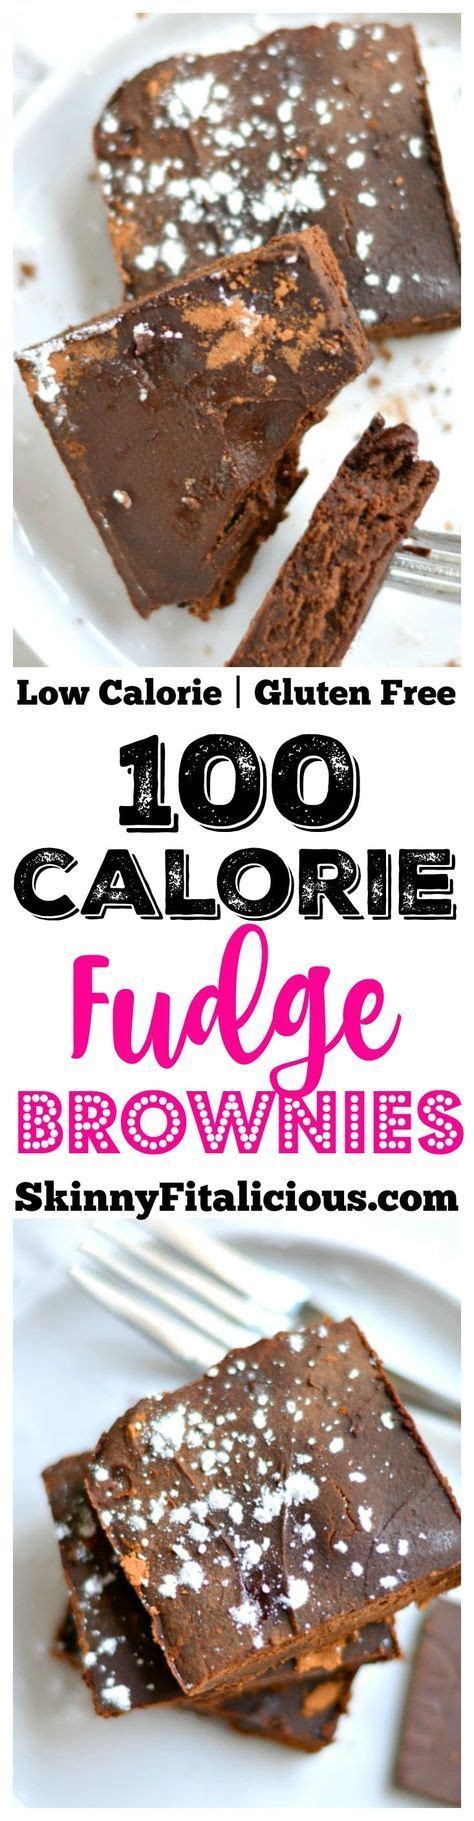 These wonderful pots of low calorie, chocolate gems are now a staple of my weekly shop. Silky 100 Calorie Fudge Brownies made healthy with rich ...